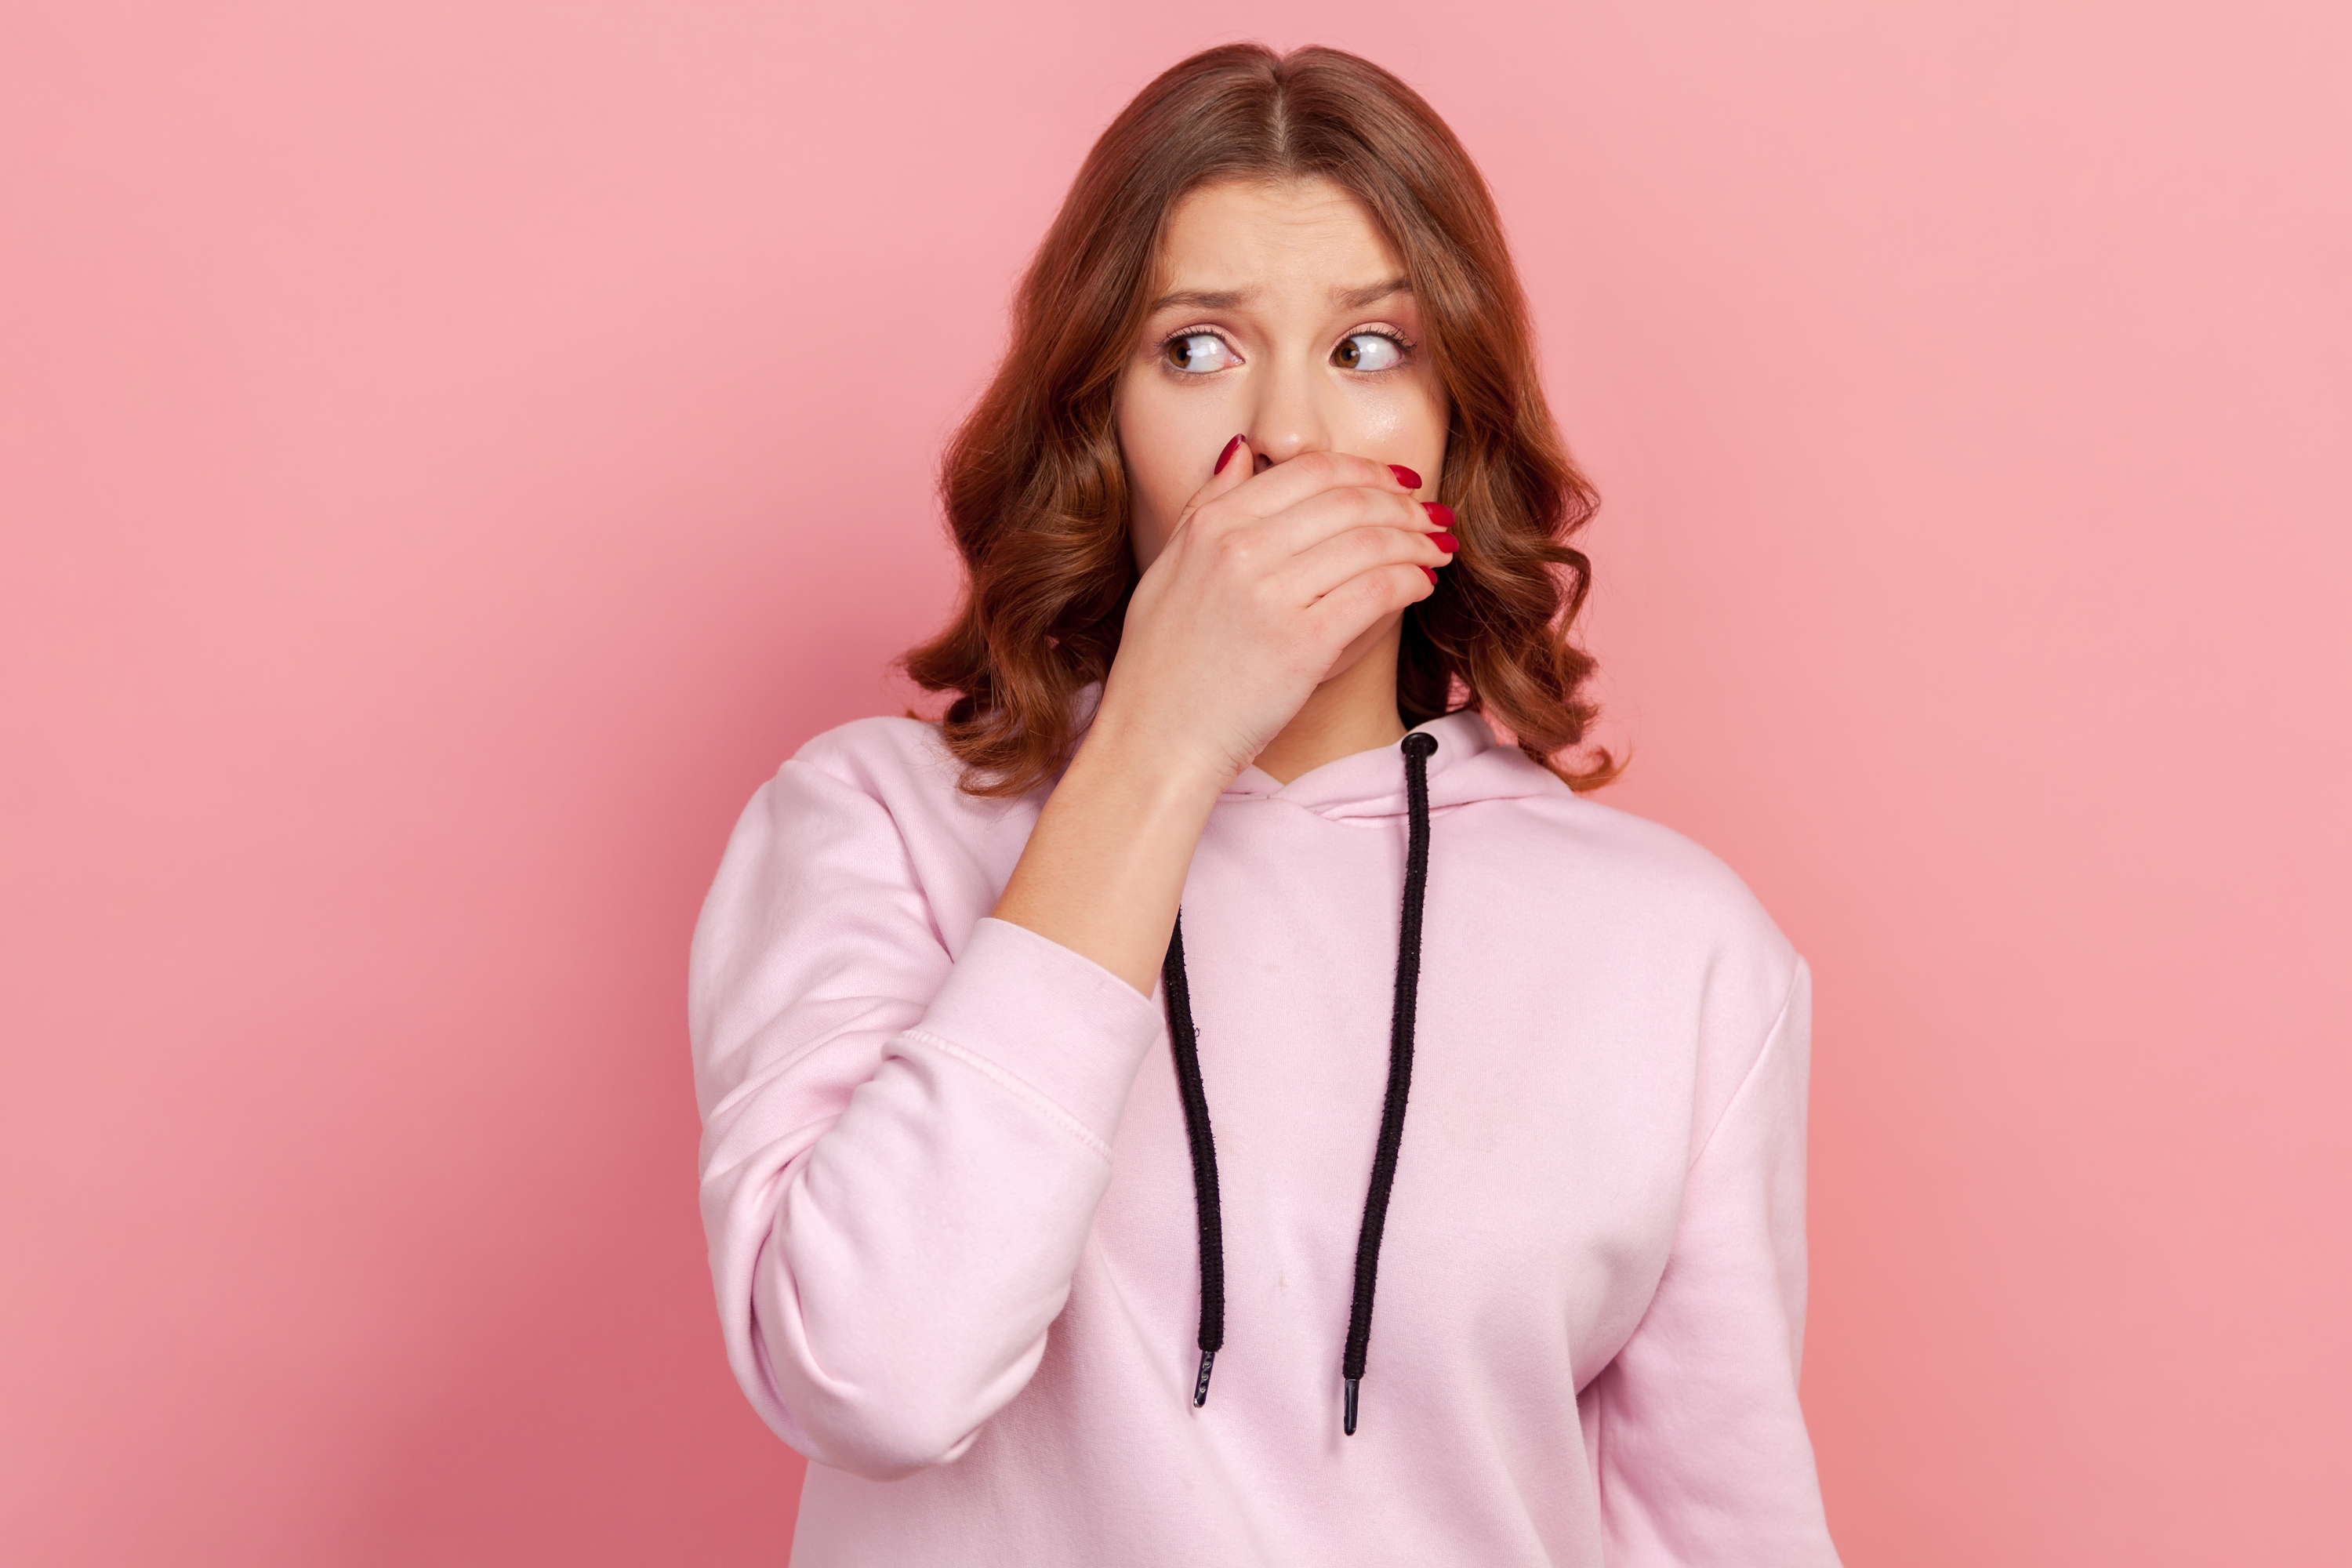 Vaginal odor: what's normal and what's not